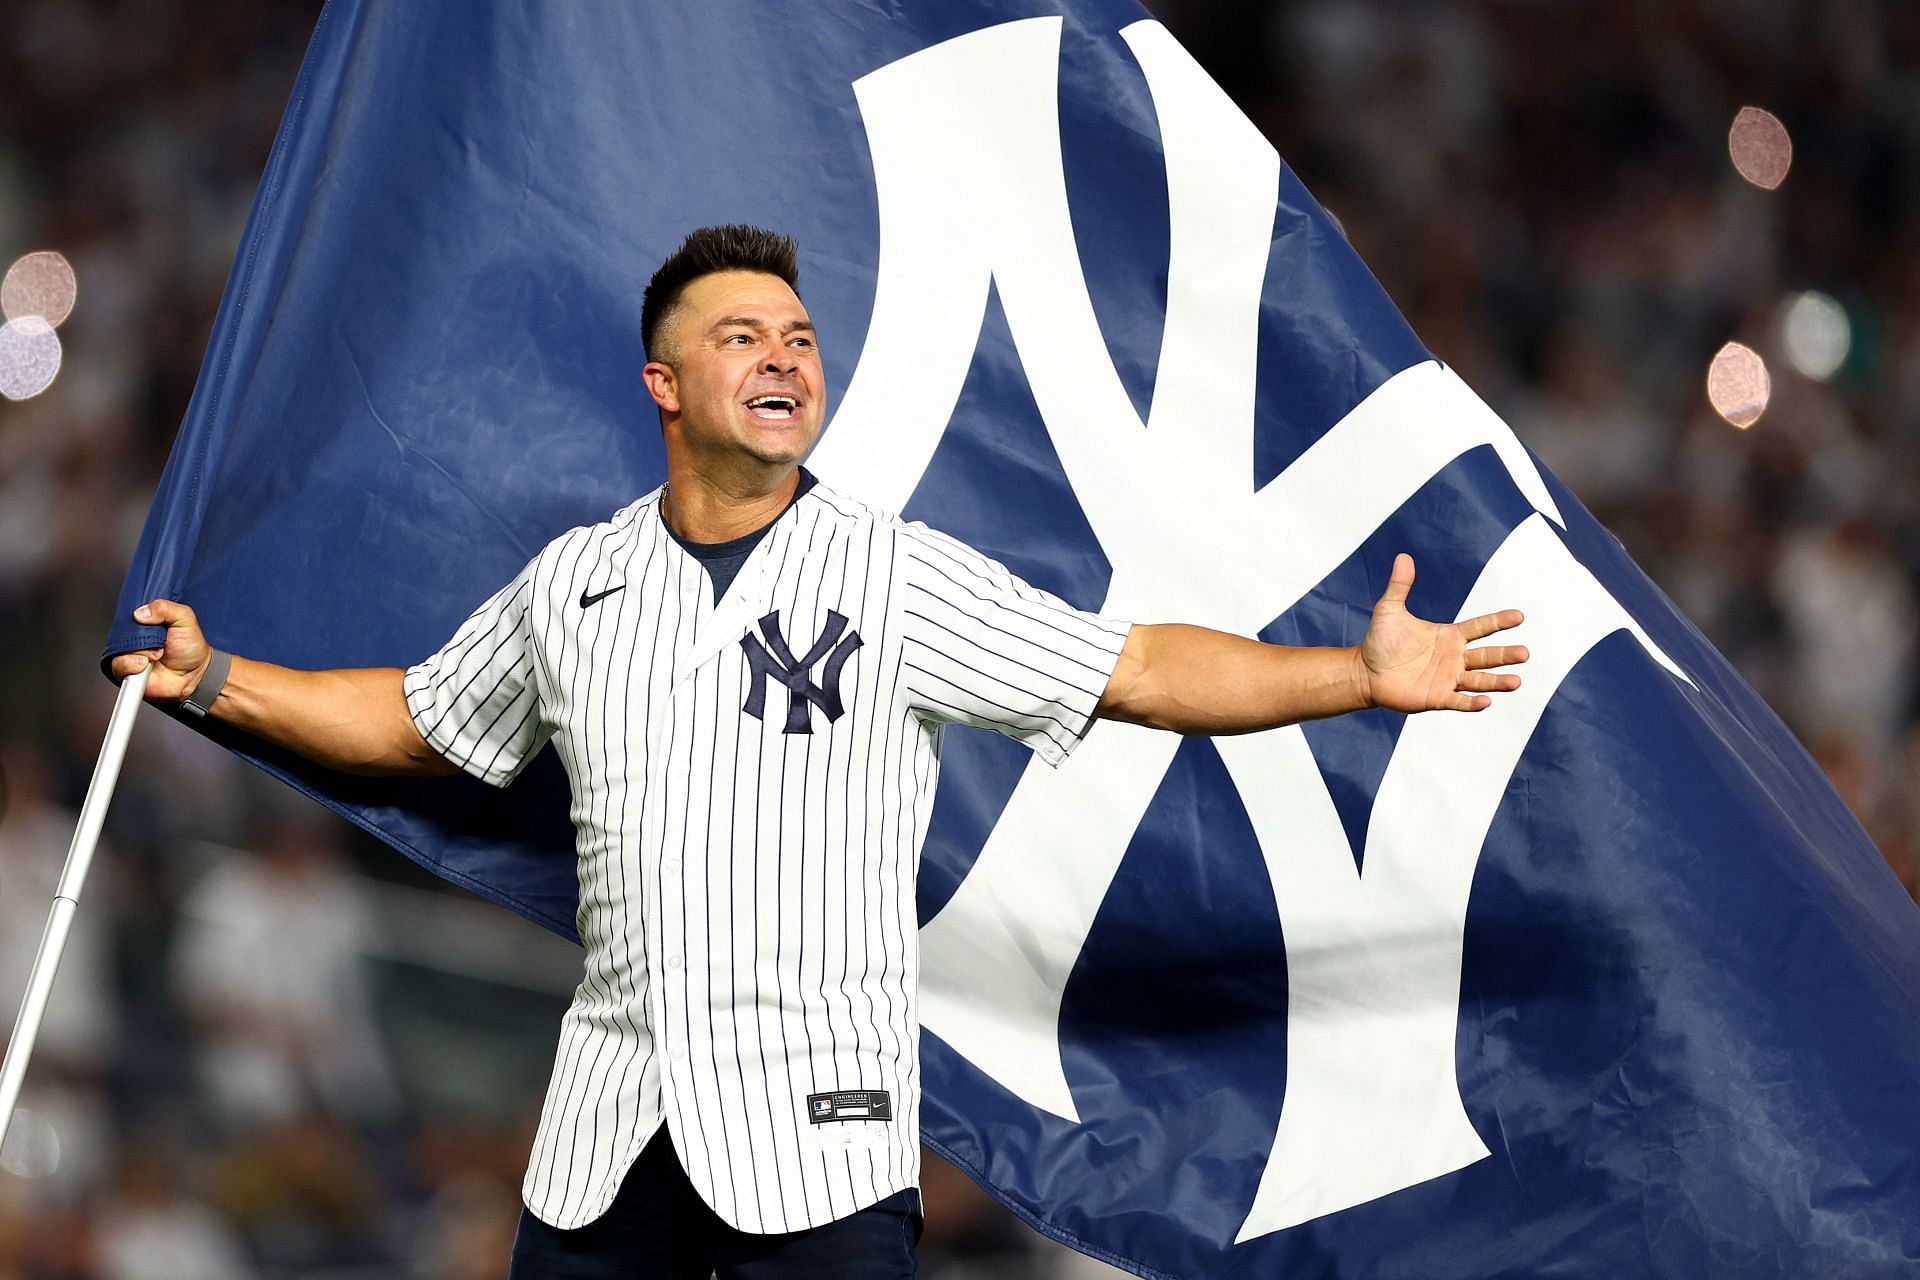 Nick Swisher boldly declares that the Yankees are ready to defeat the  Astros and become champions again